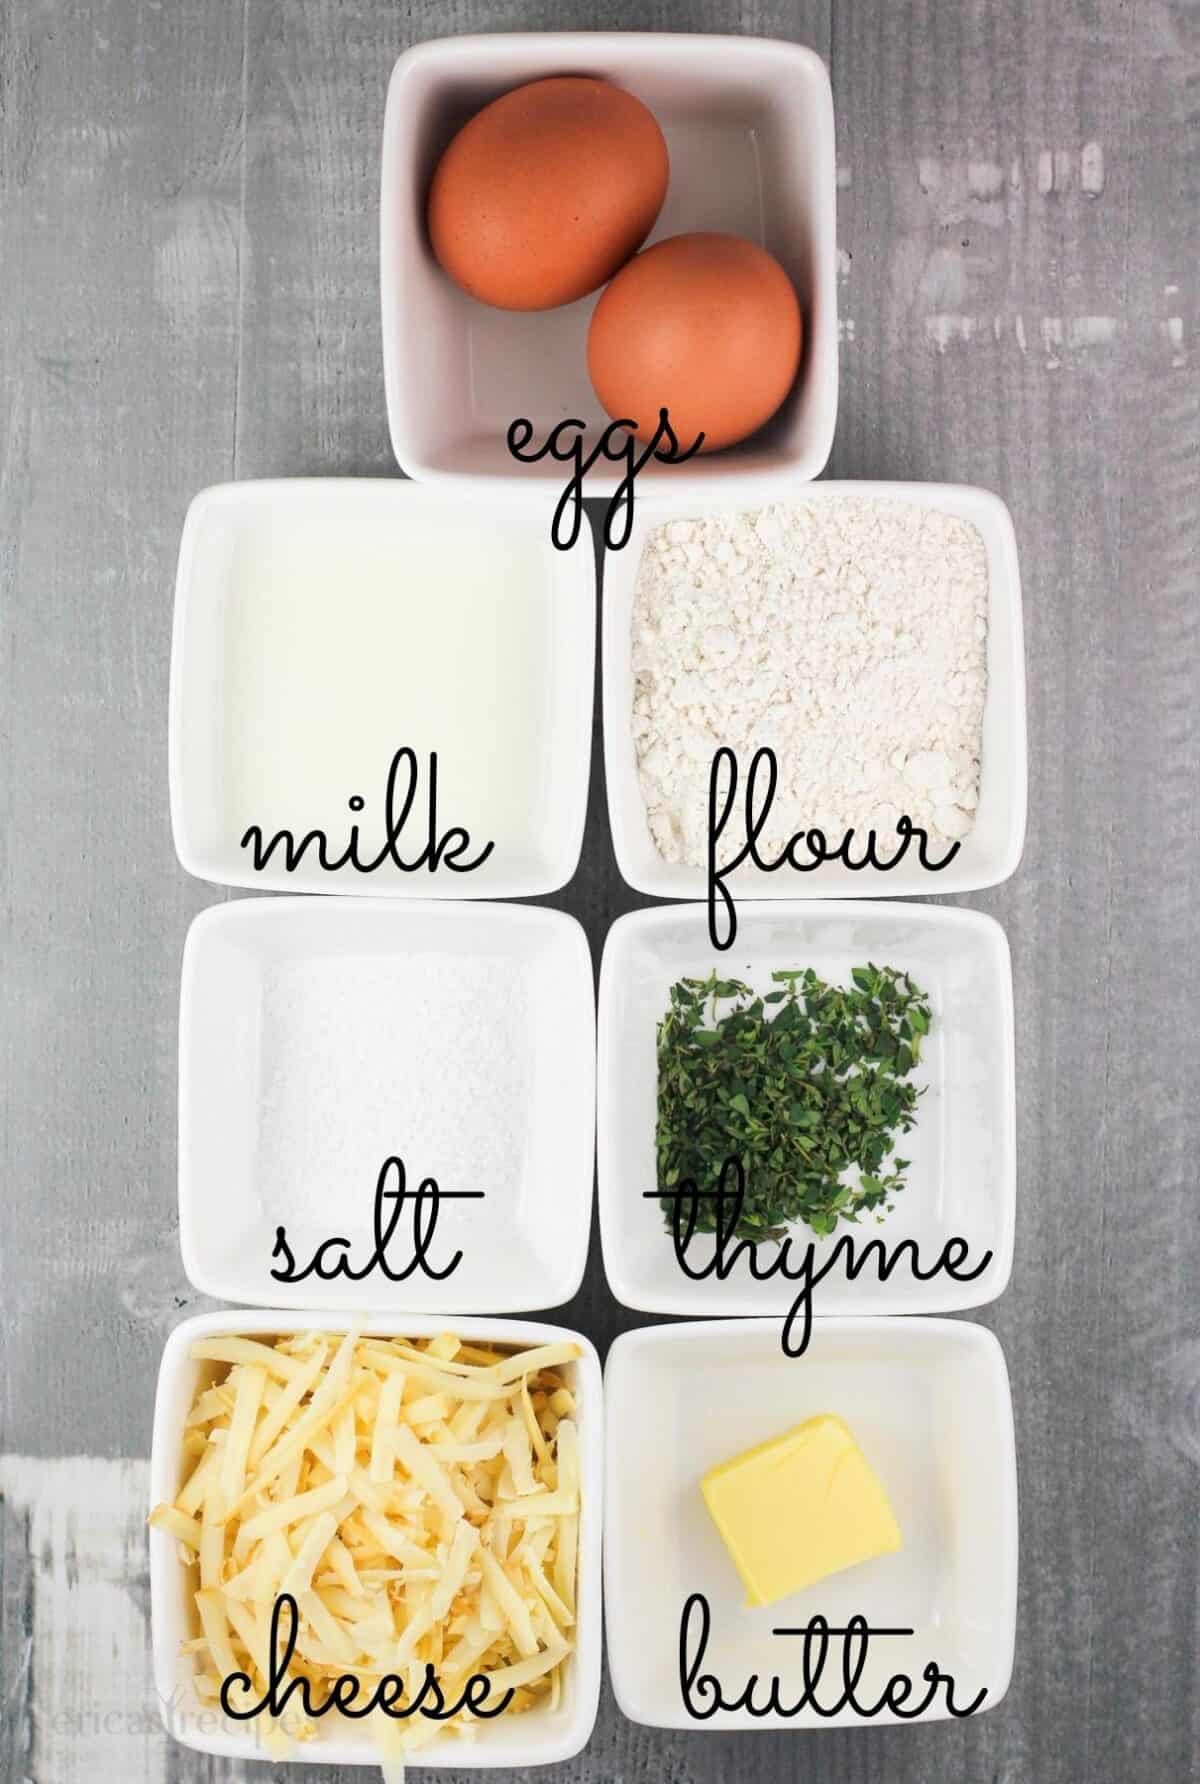 7 small white bowls with popover ingredients labeled